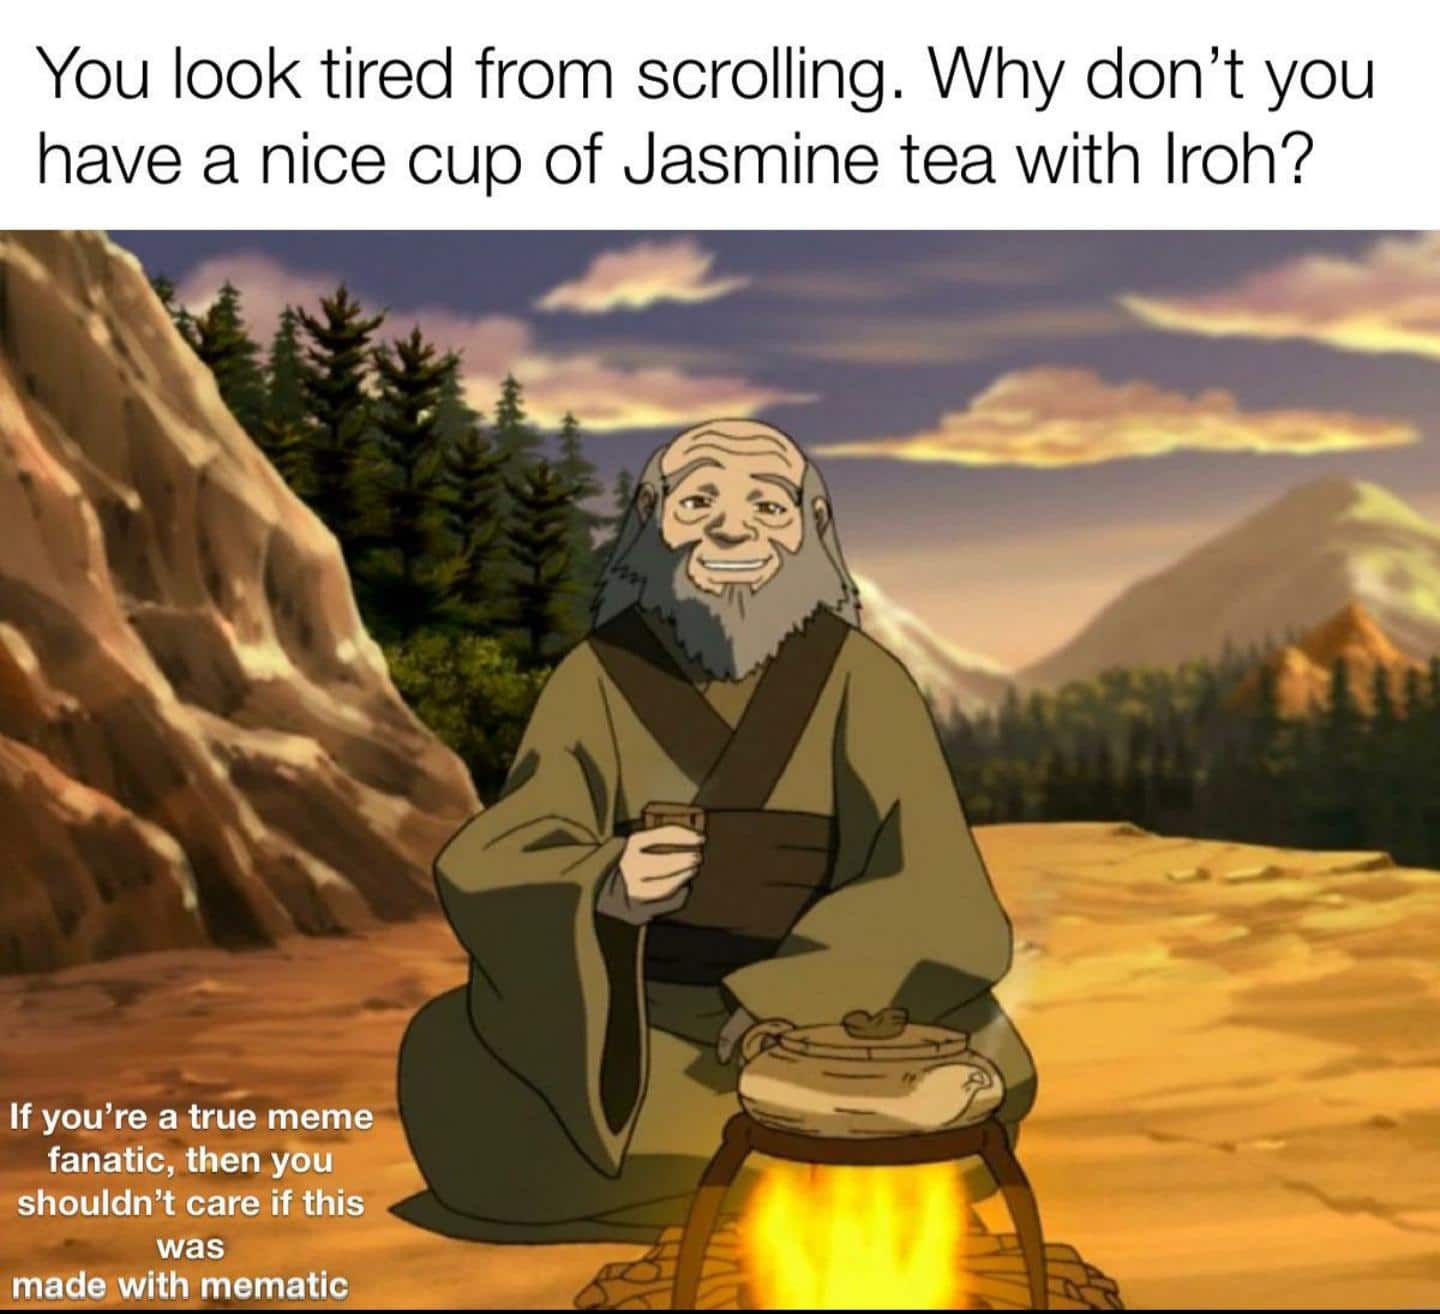 Dank, Visit, Reddit, OC, Negative, JPEG other memes Dank, Visit, Reddit, OC, Negative, JPEG text: You look tired from scrolling. Why don't you have a nice cup of Jasmine tea with Iroh? If you're a true meme fanatic, then you shouldn't care if this was madeMith mematic 